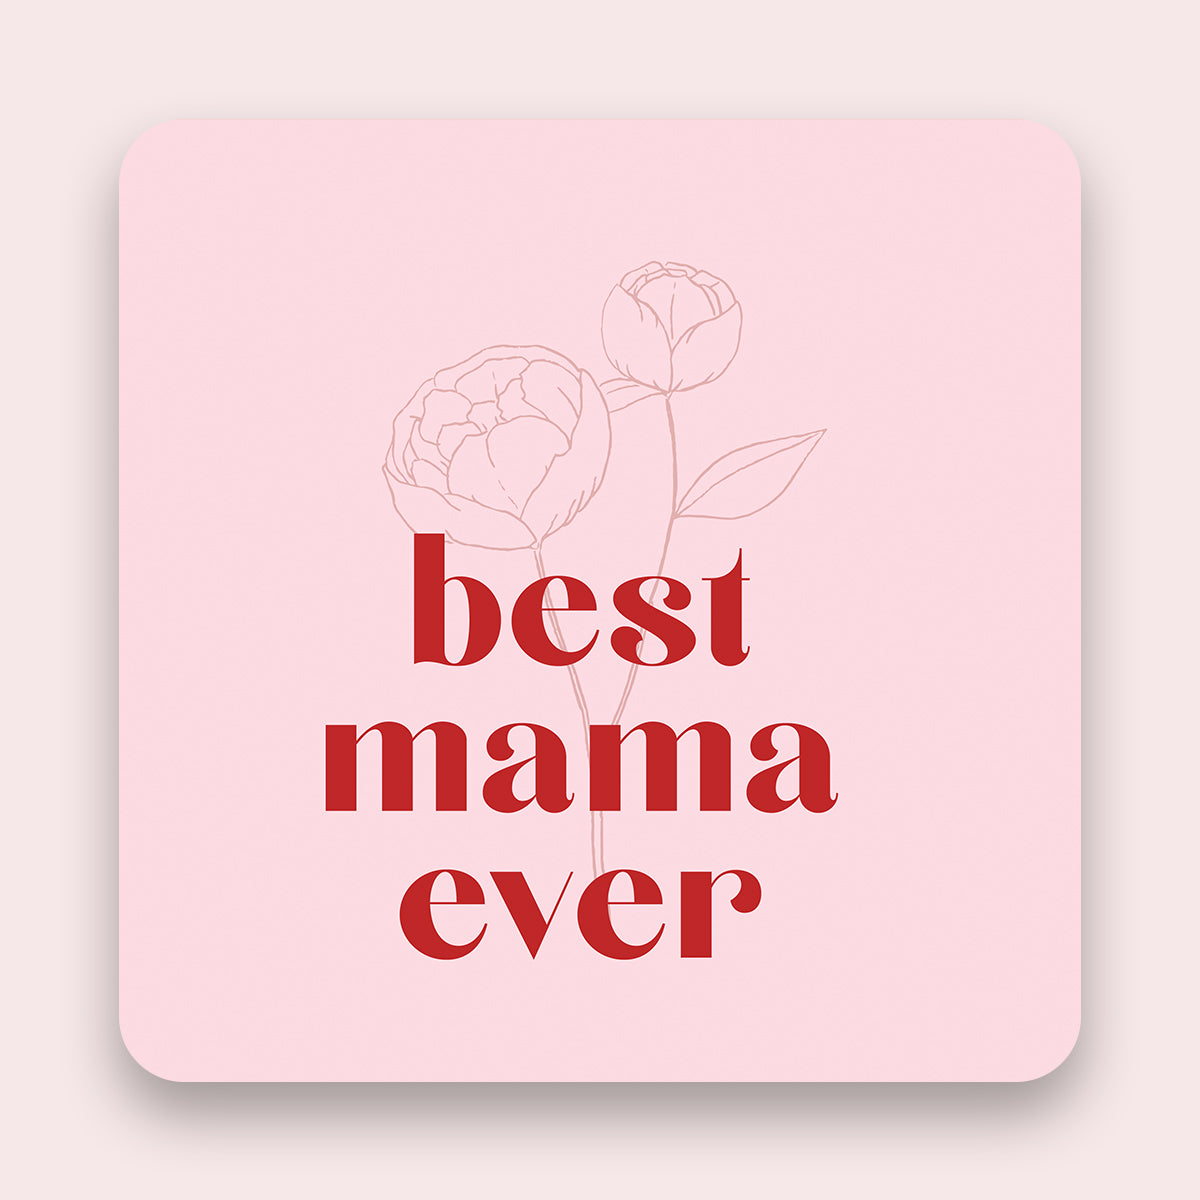 Mother's Day Handheld Signs